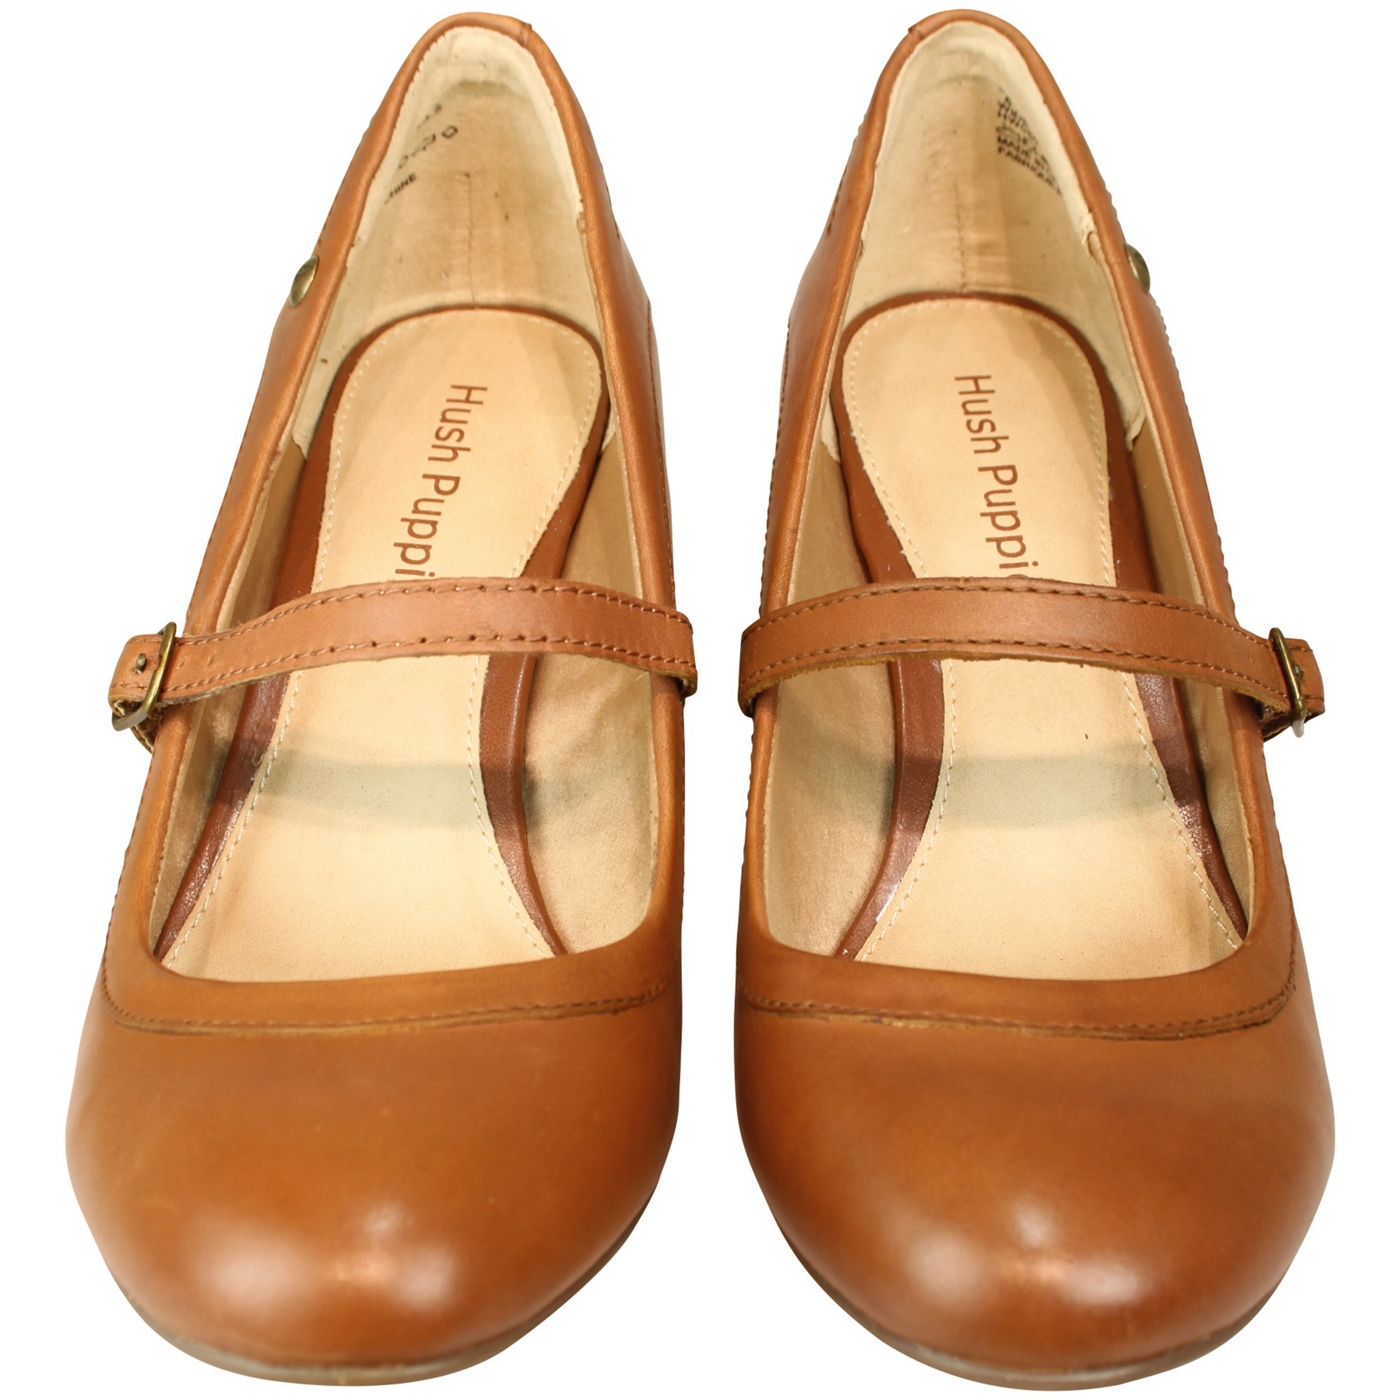 Hush Puppies Womens tan Sisany mary jane court shoes